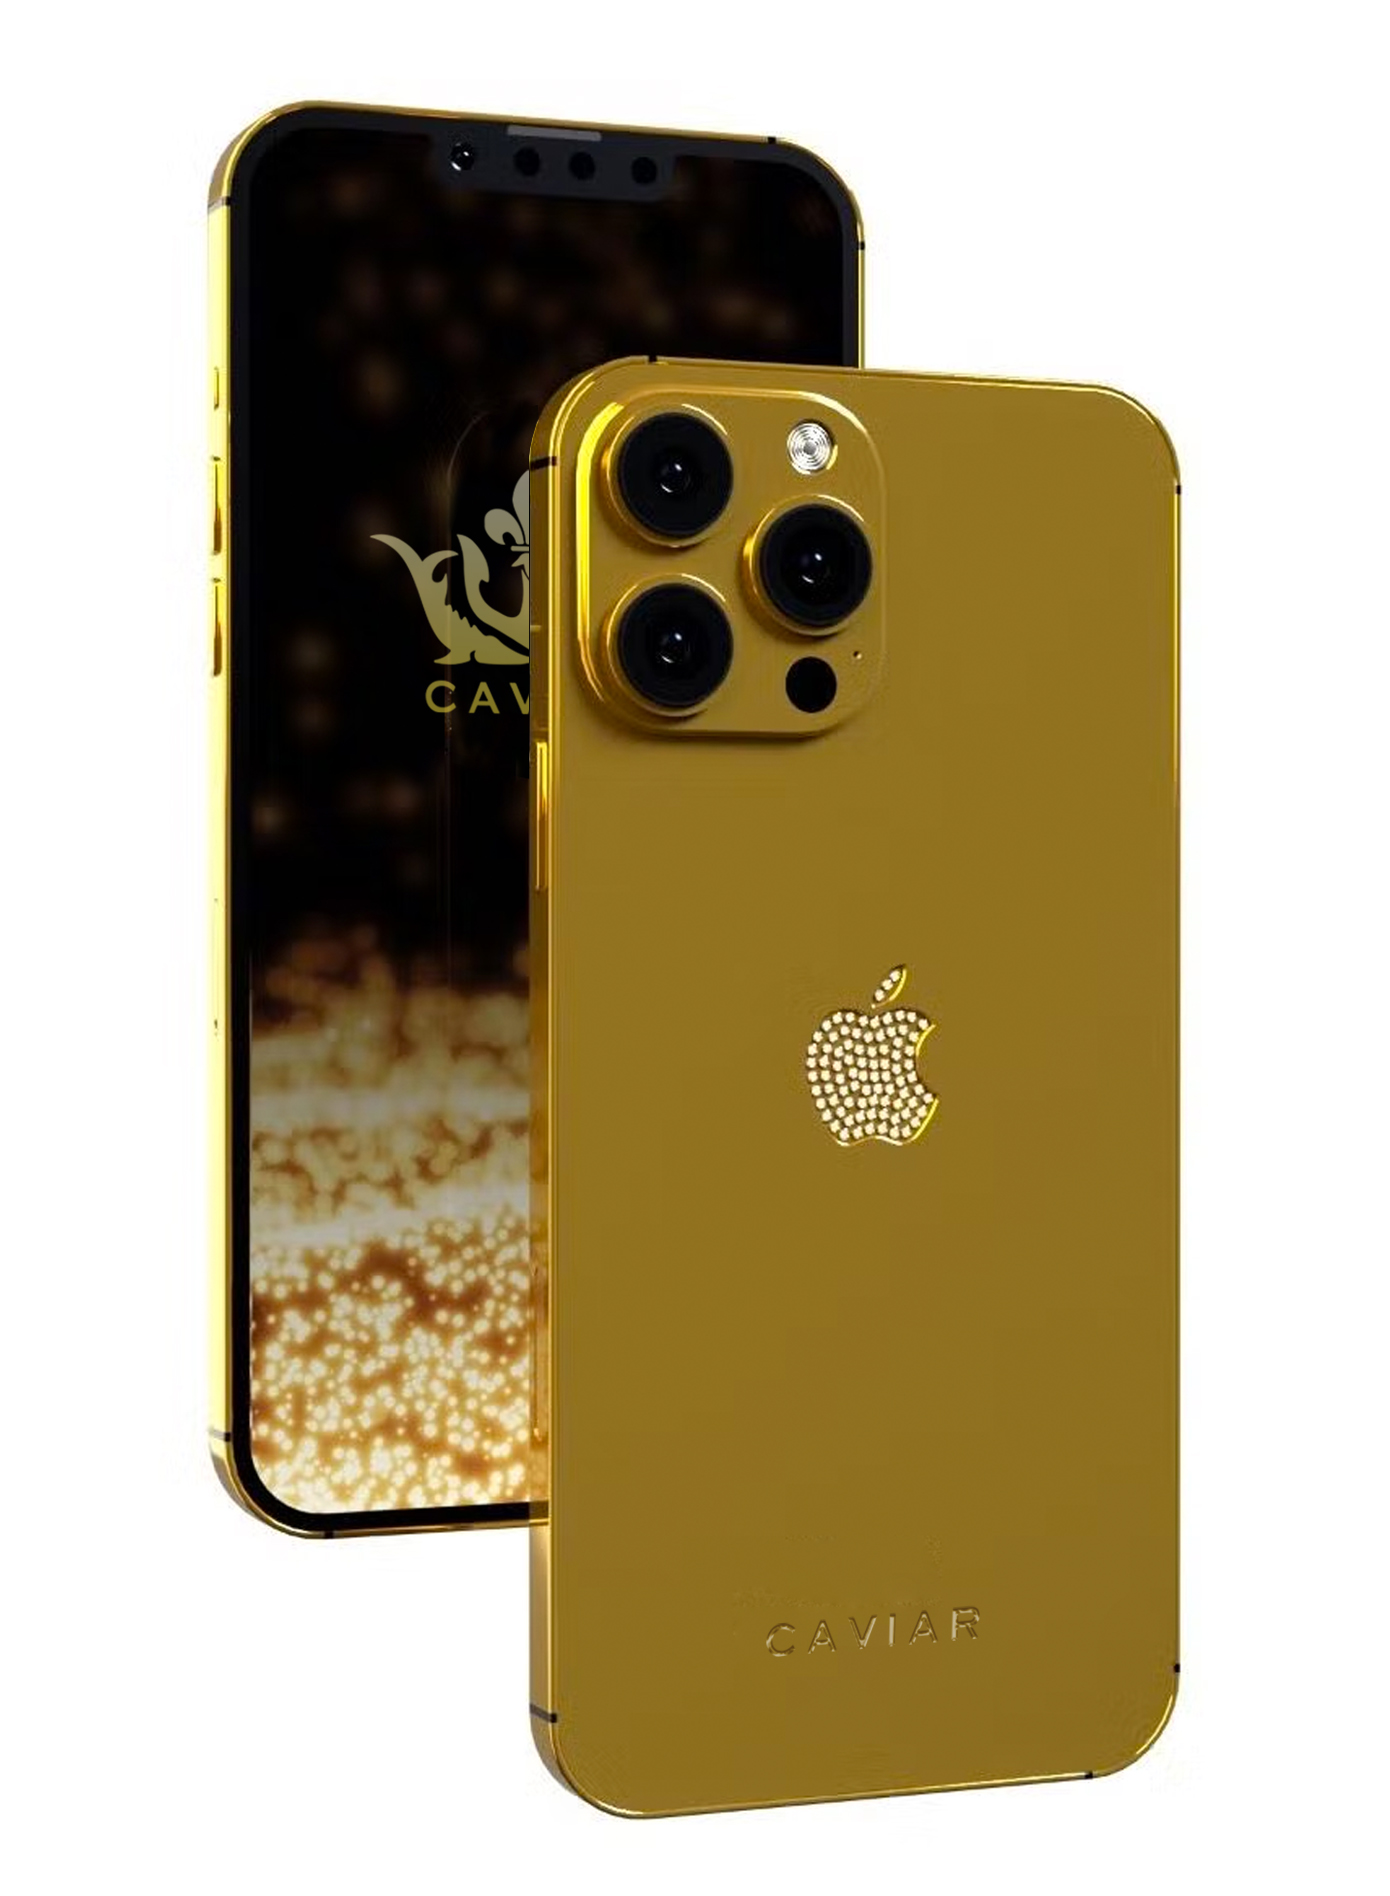 Caviar Luxury 24K Gold Customized iPhone 14 Pro Max Limited Edition 256 GB